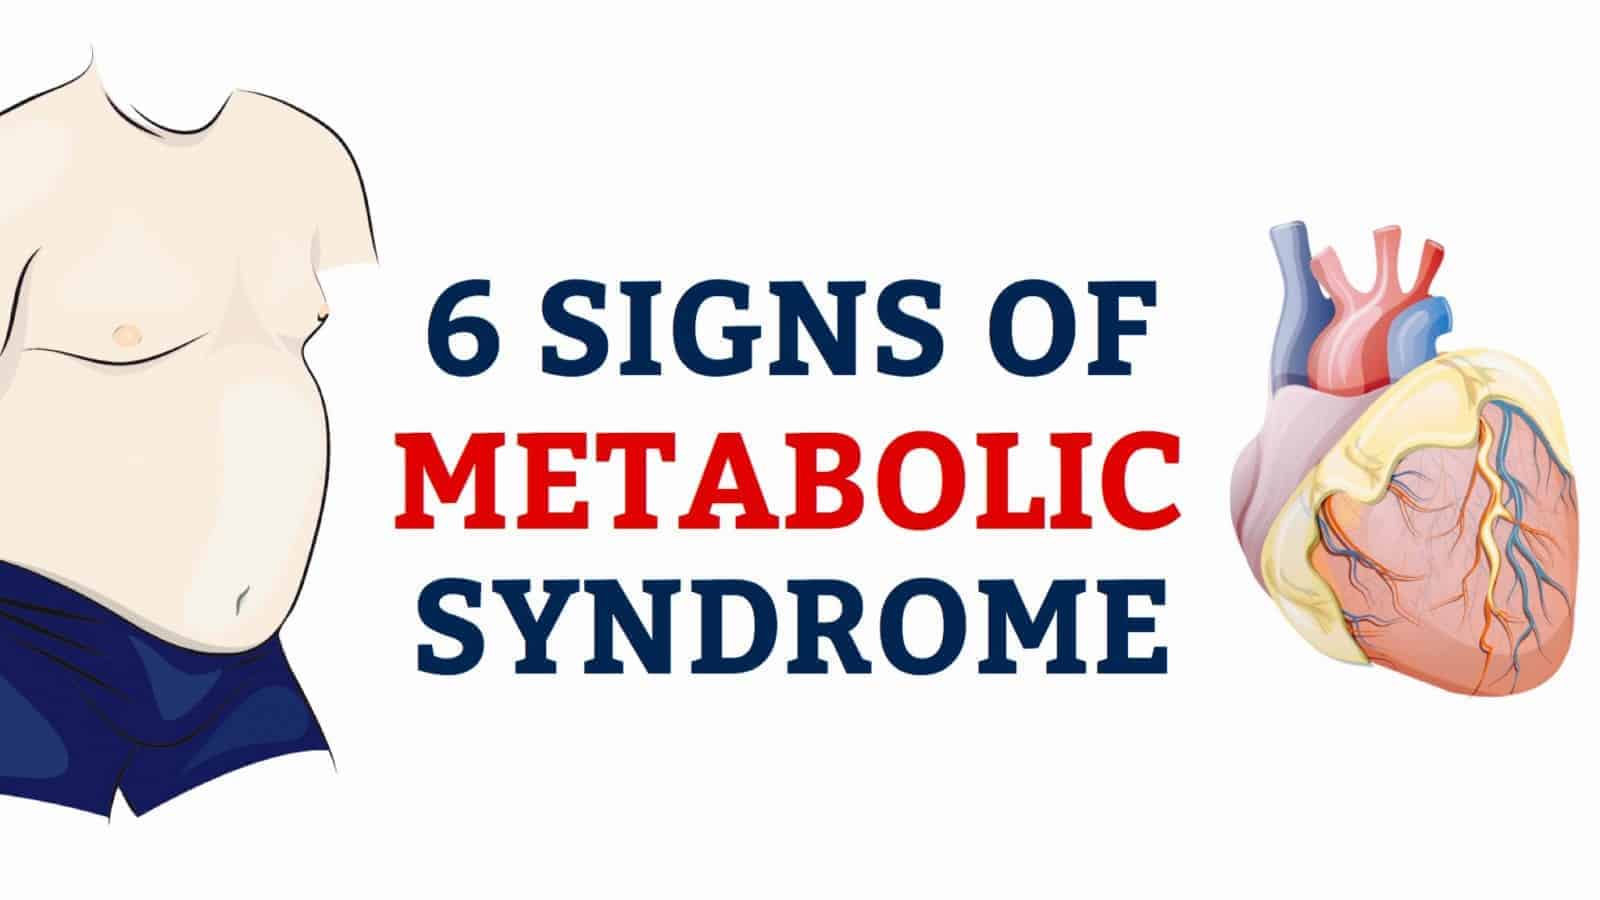 6 Signs of Metabolic Syndrome